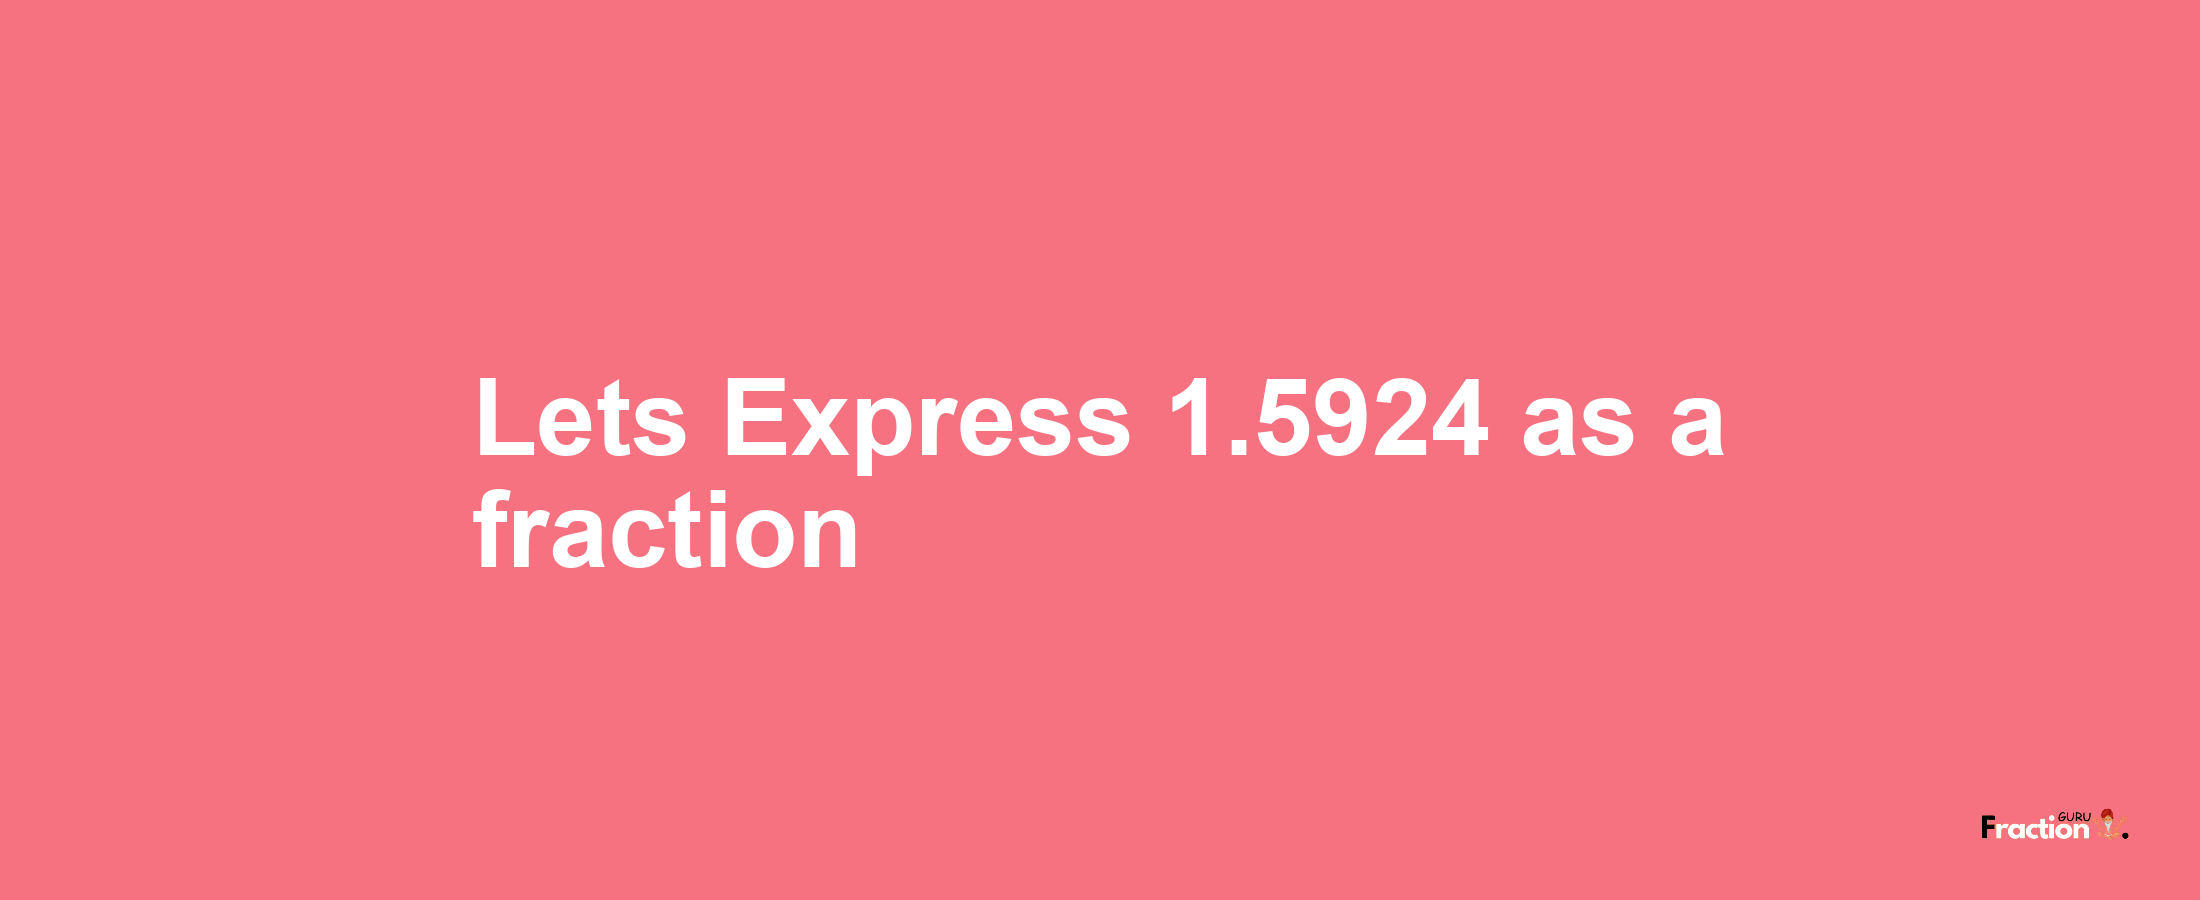 Lets Express 1.5924 as afraction